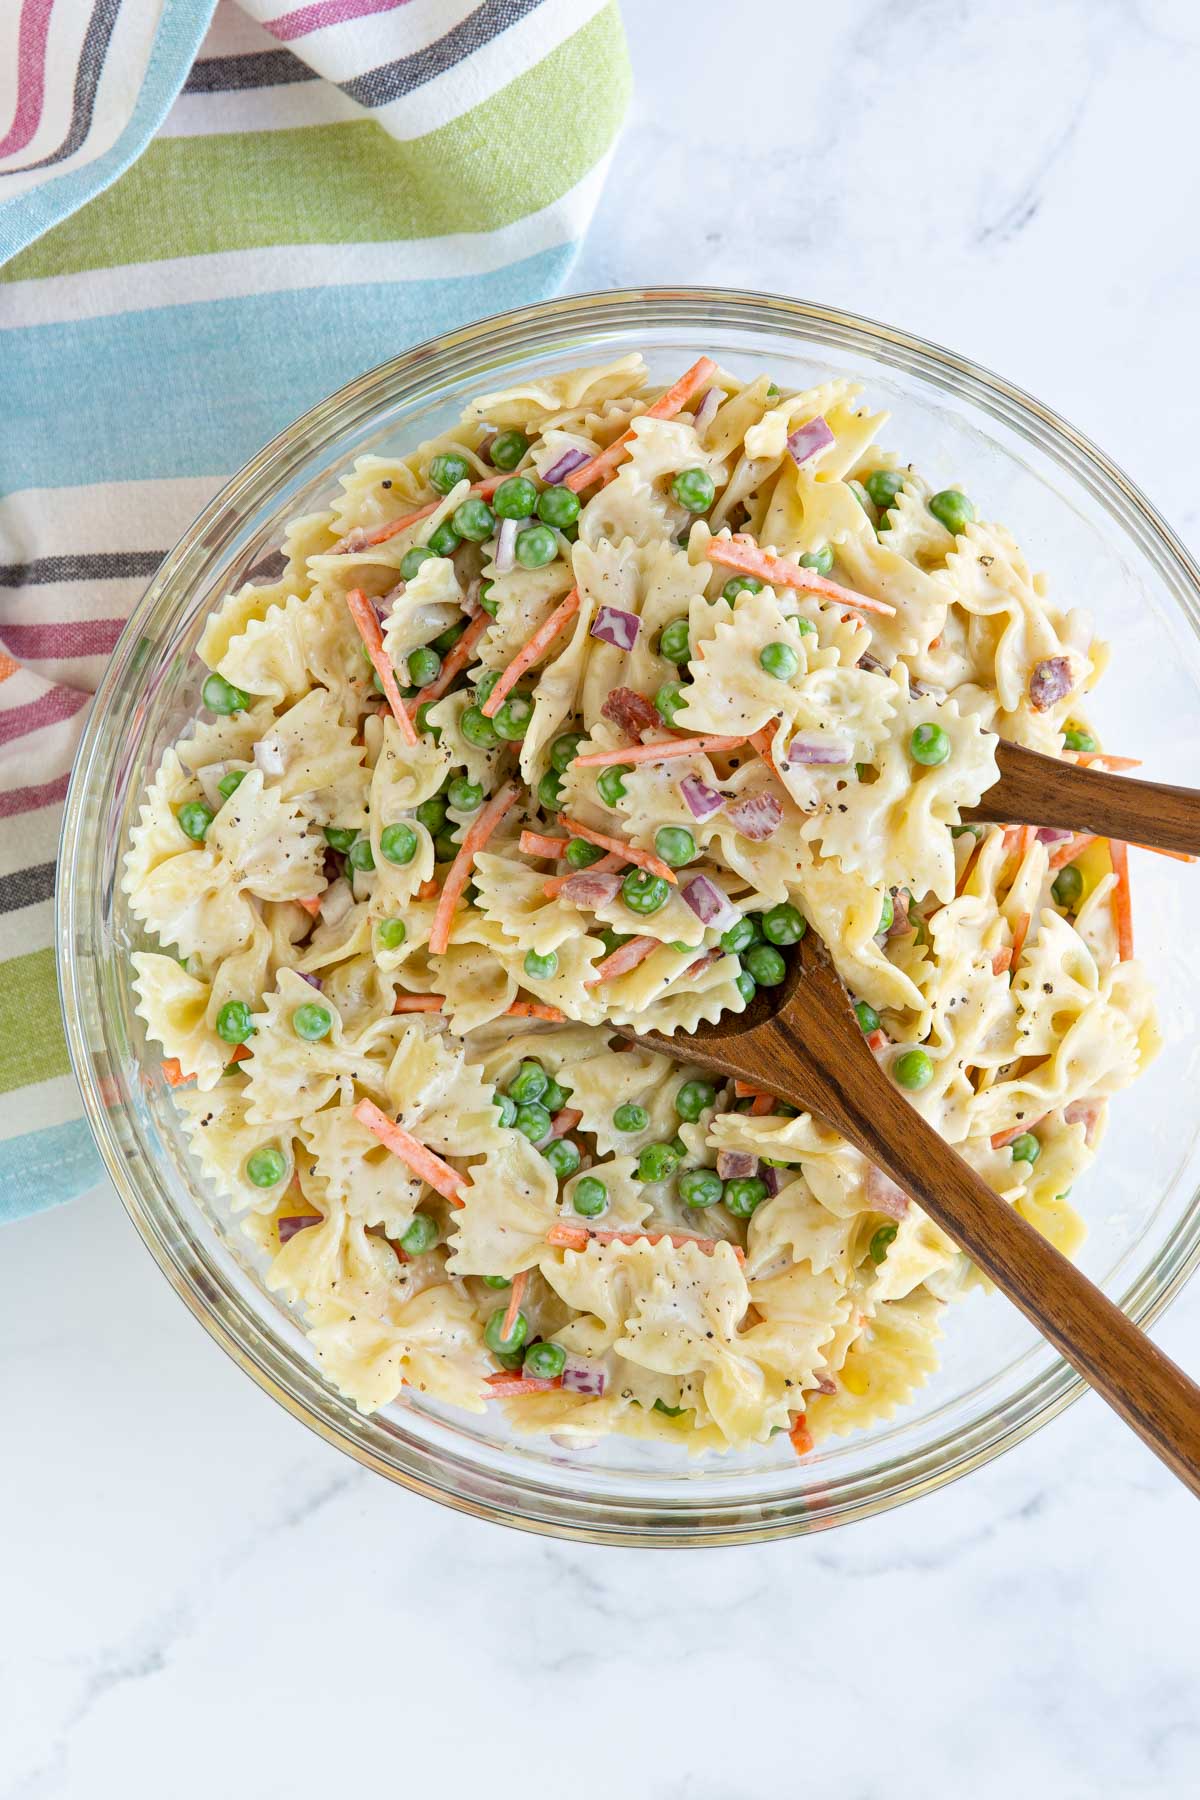 Pea pasta salad with wooden salad servers in a large glass bowl.